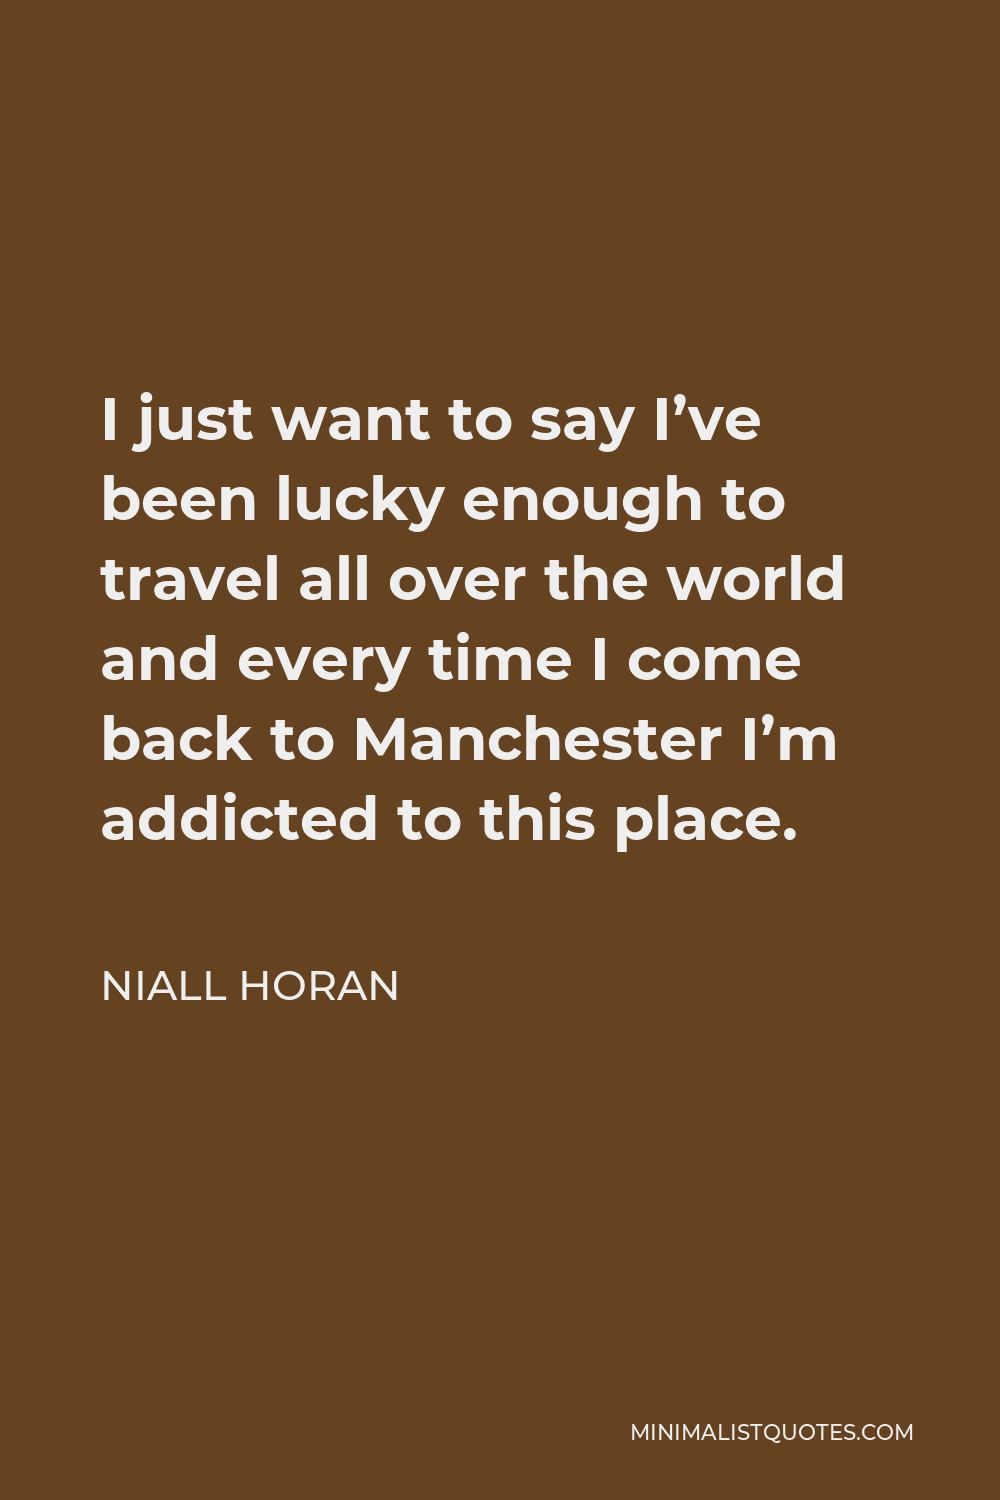 Niall Horan Quote - I just want to say I’ve been lucky enough to travel all over the world and every time I come back to Manchester I’m addicted to this place.